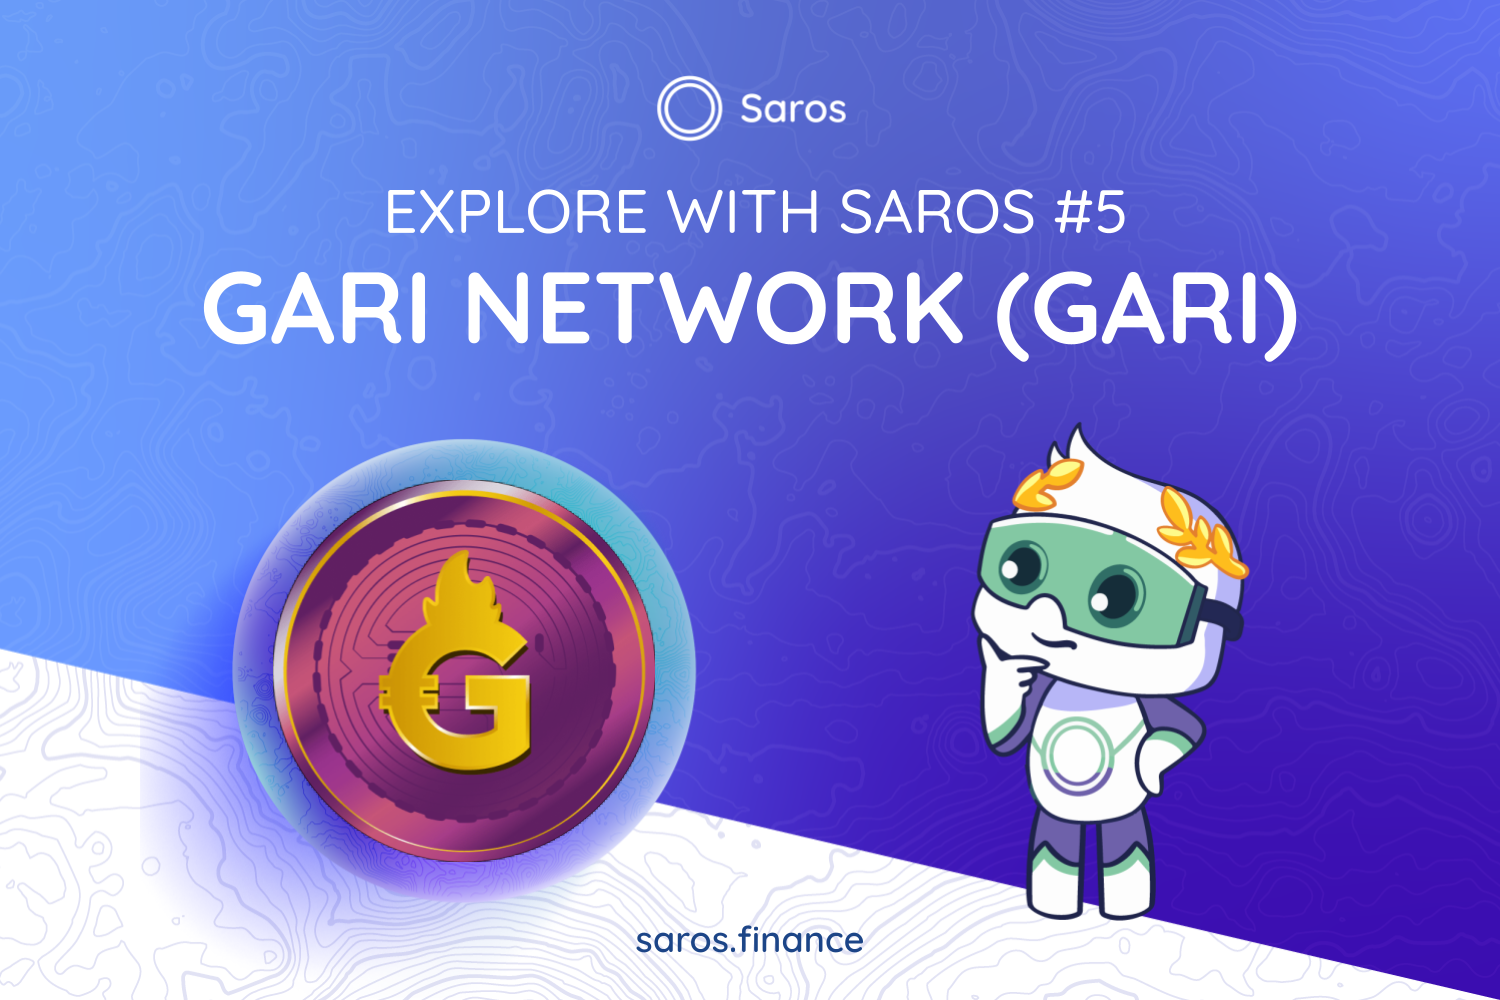 Explore with Saros #5: Everything you need to know about Gari Network (GARI)